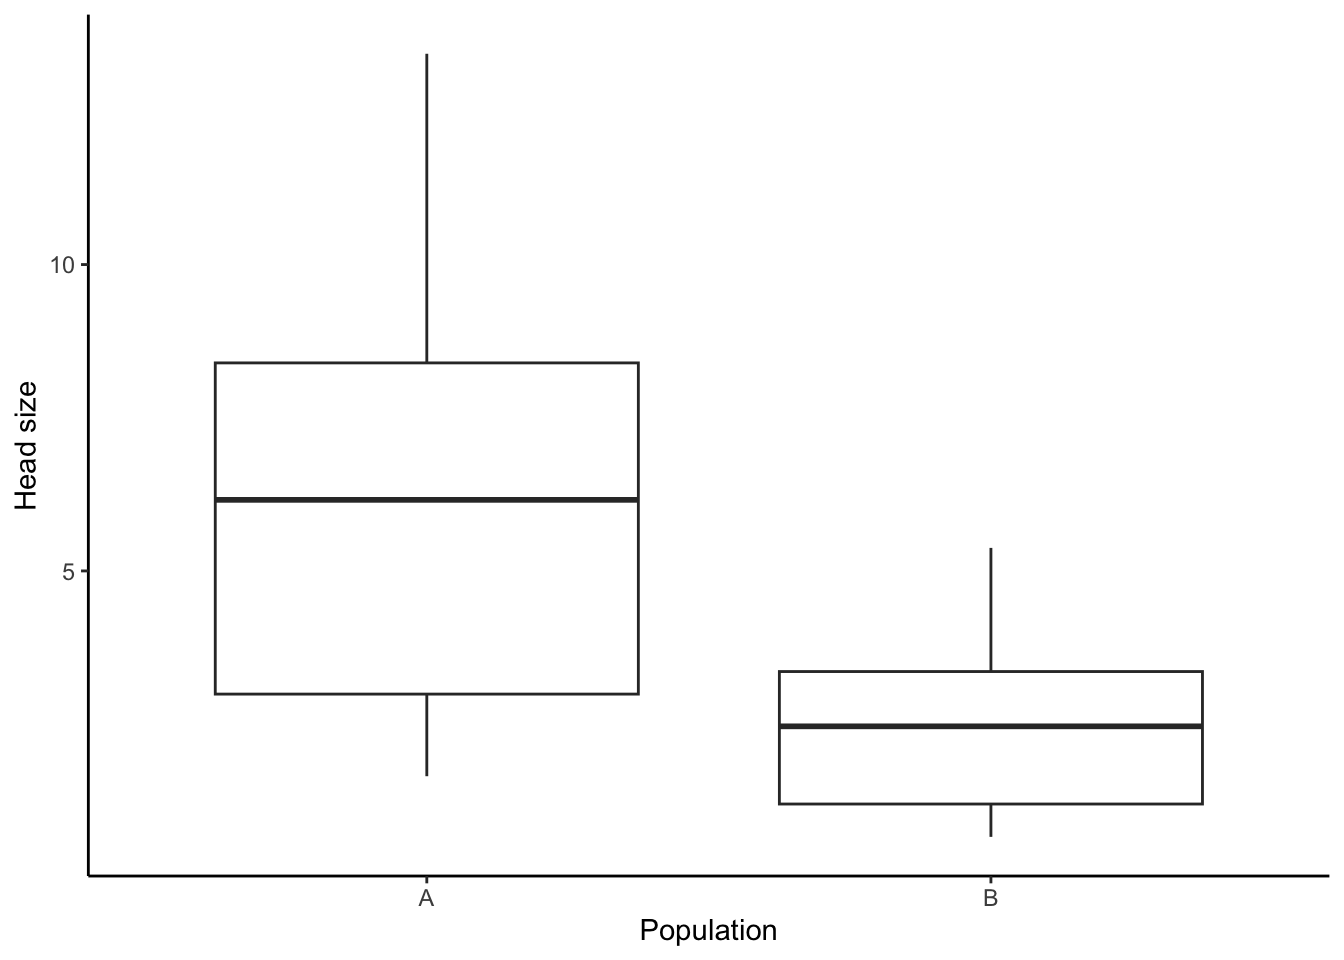 Head size differences between two hypothetical populations, A and B, illustrated with a [box plot](graph-library.html#box-plot).